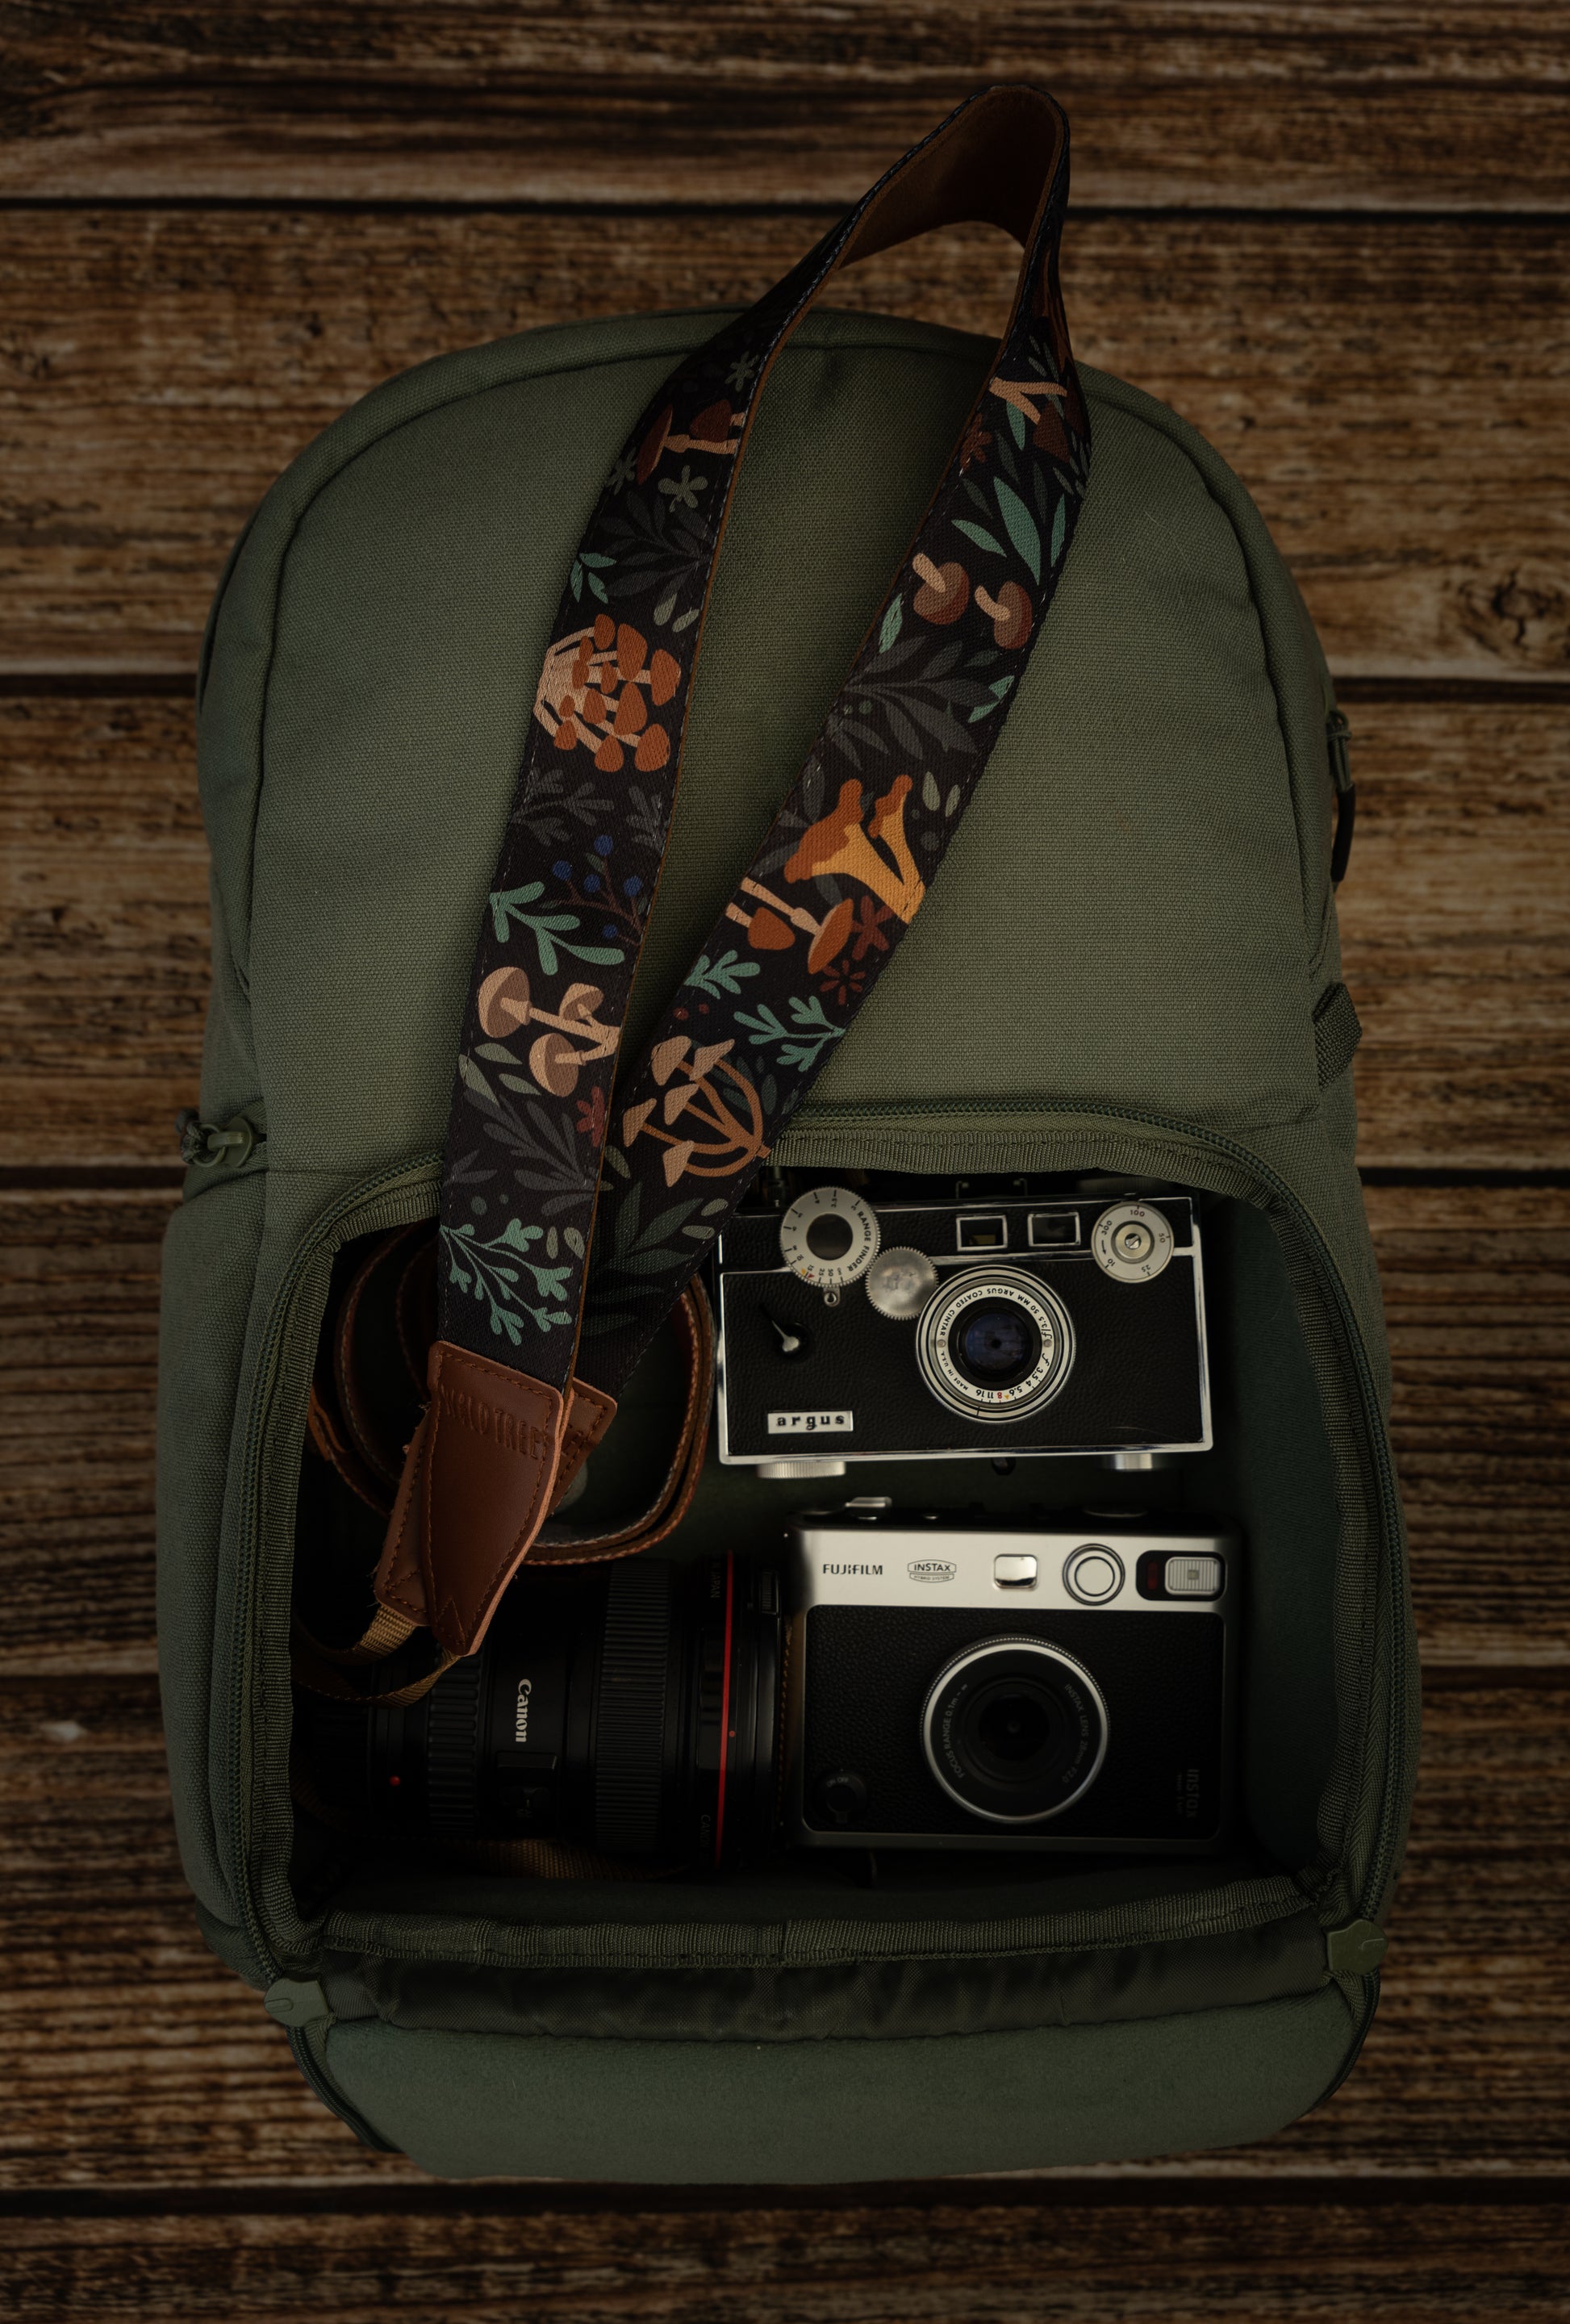 Wildtree Forest Foliage Camera laying out on green brevite backpack - Best camera strap for canon camera.